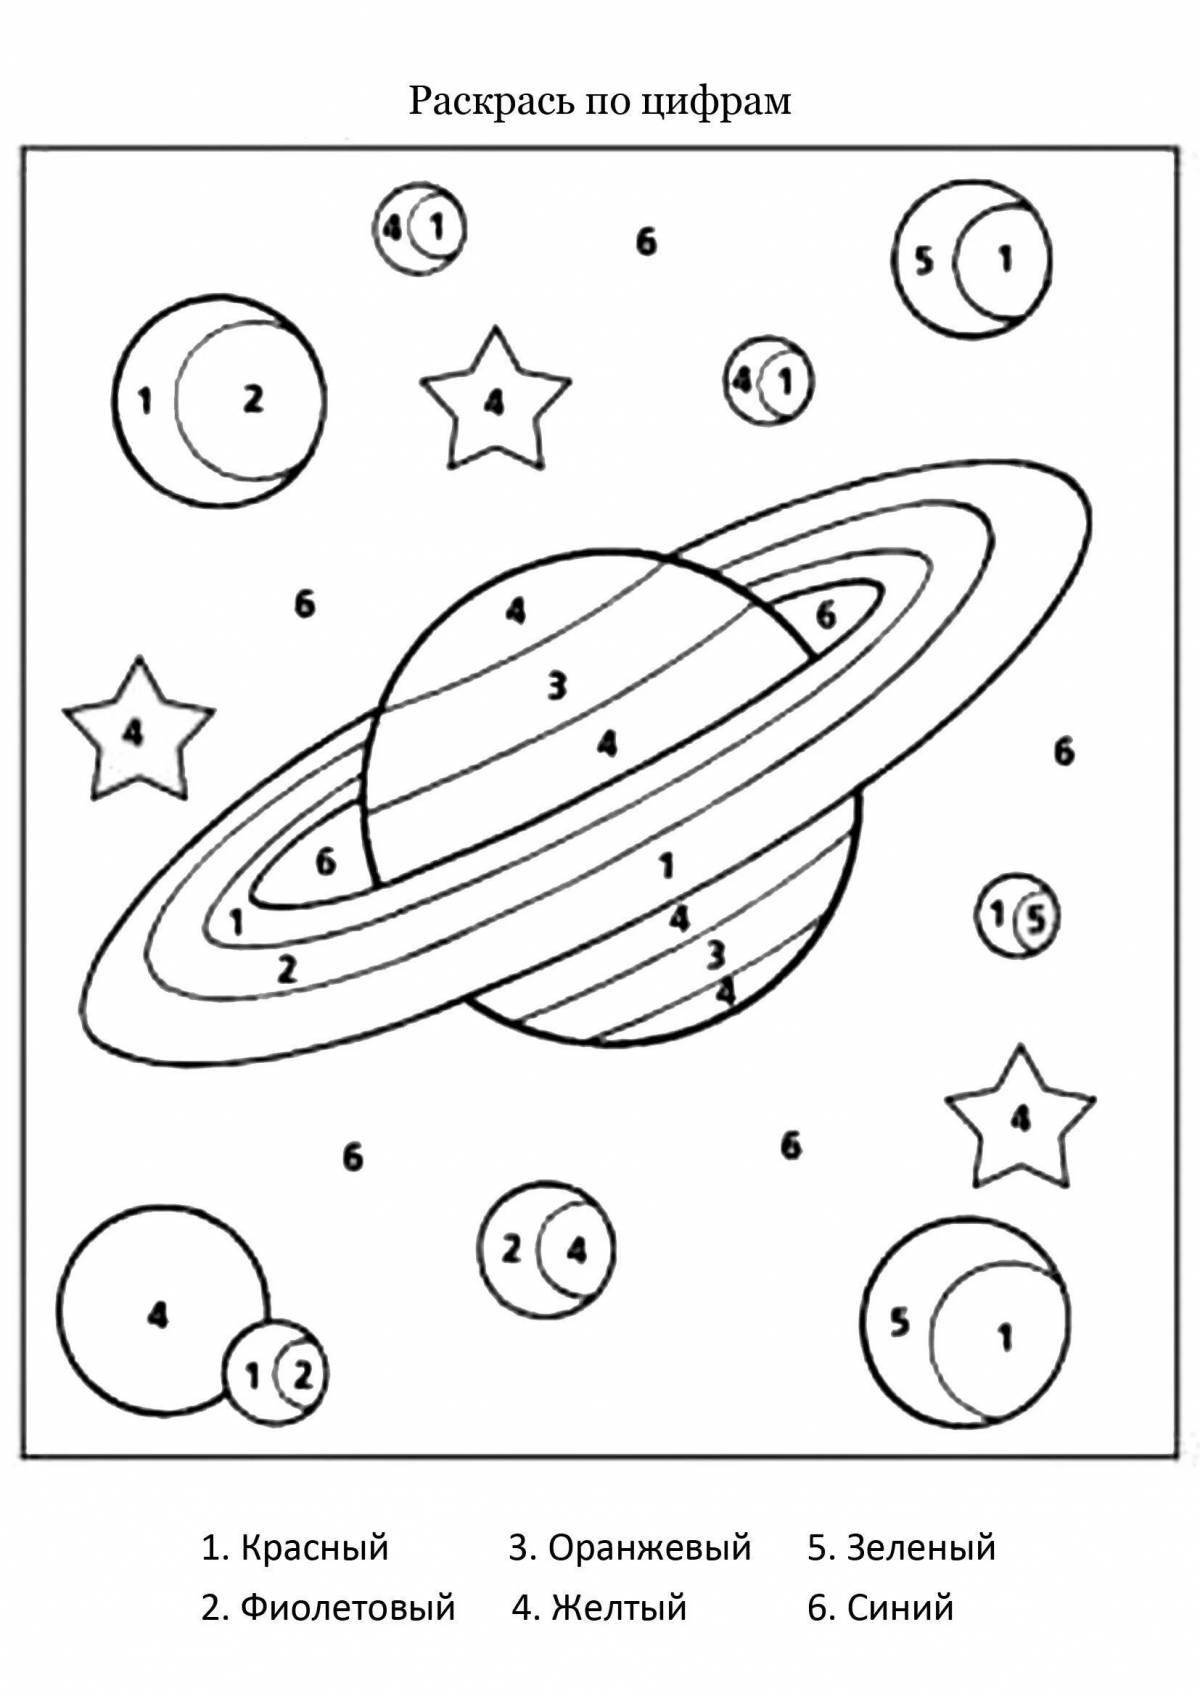 Comic space by numbers coloring book